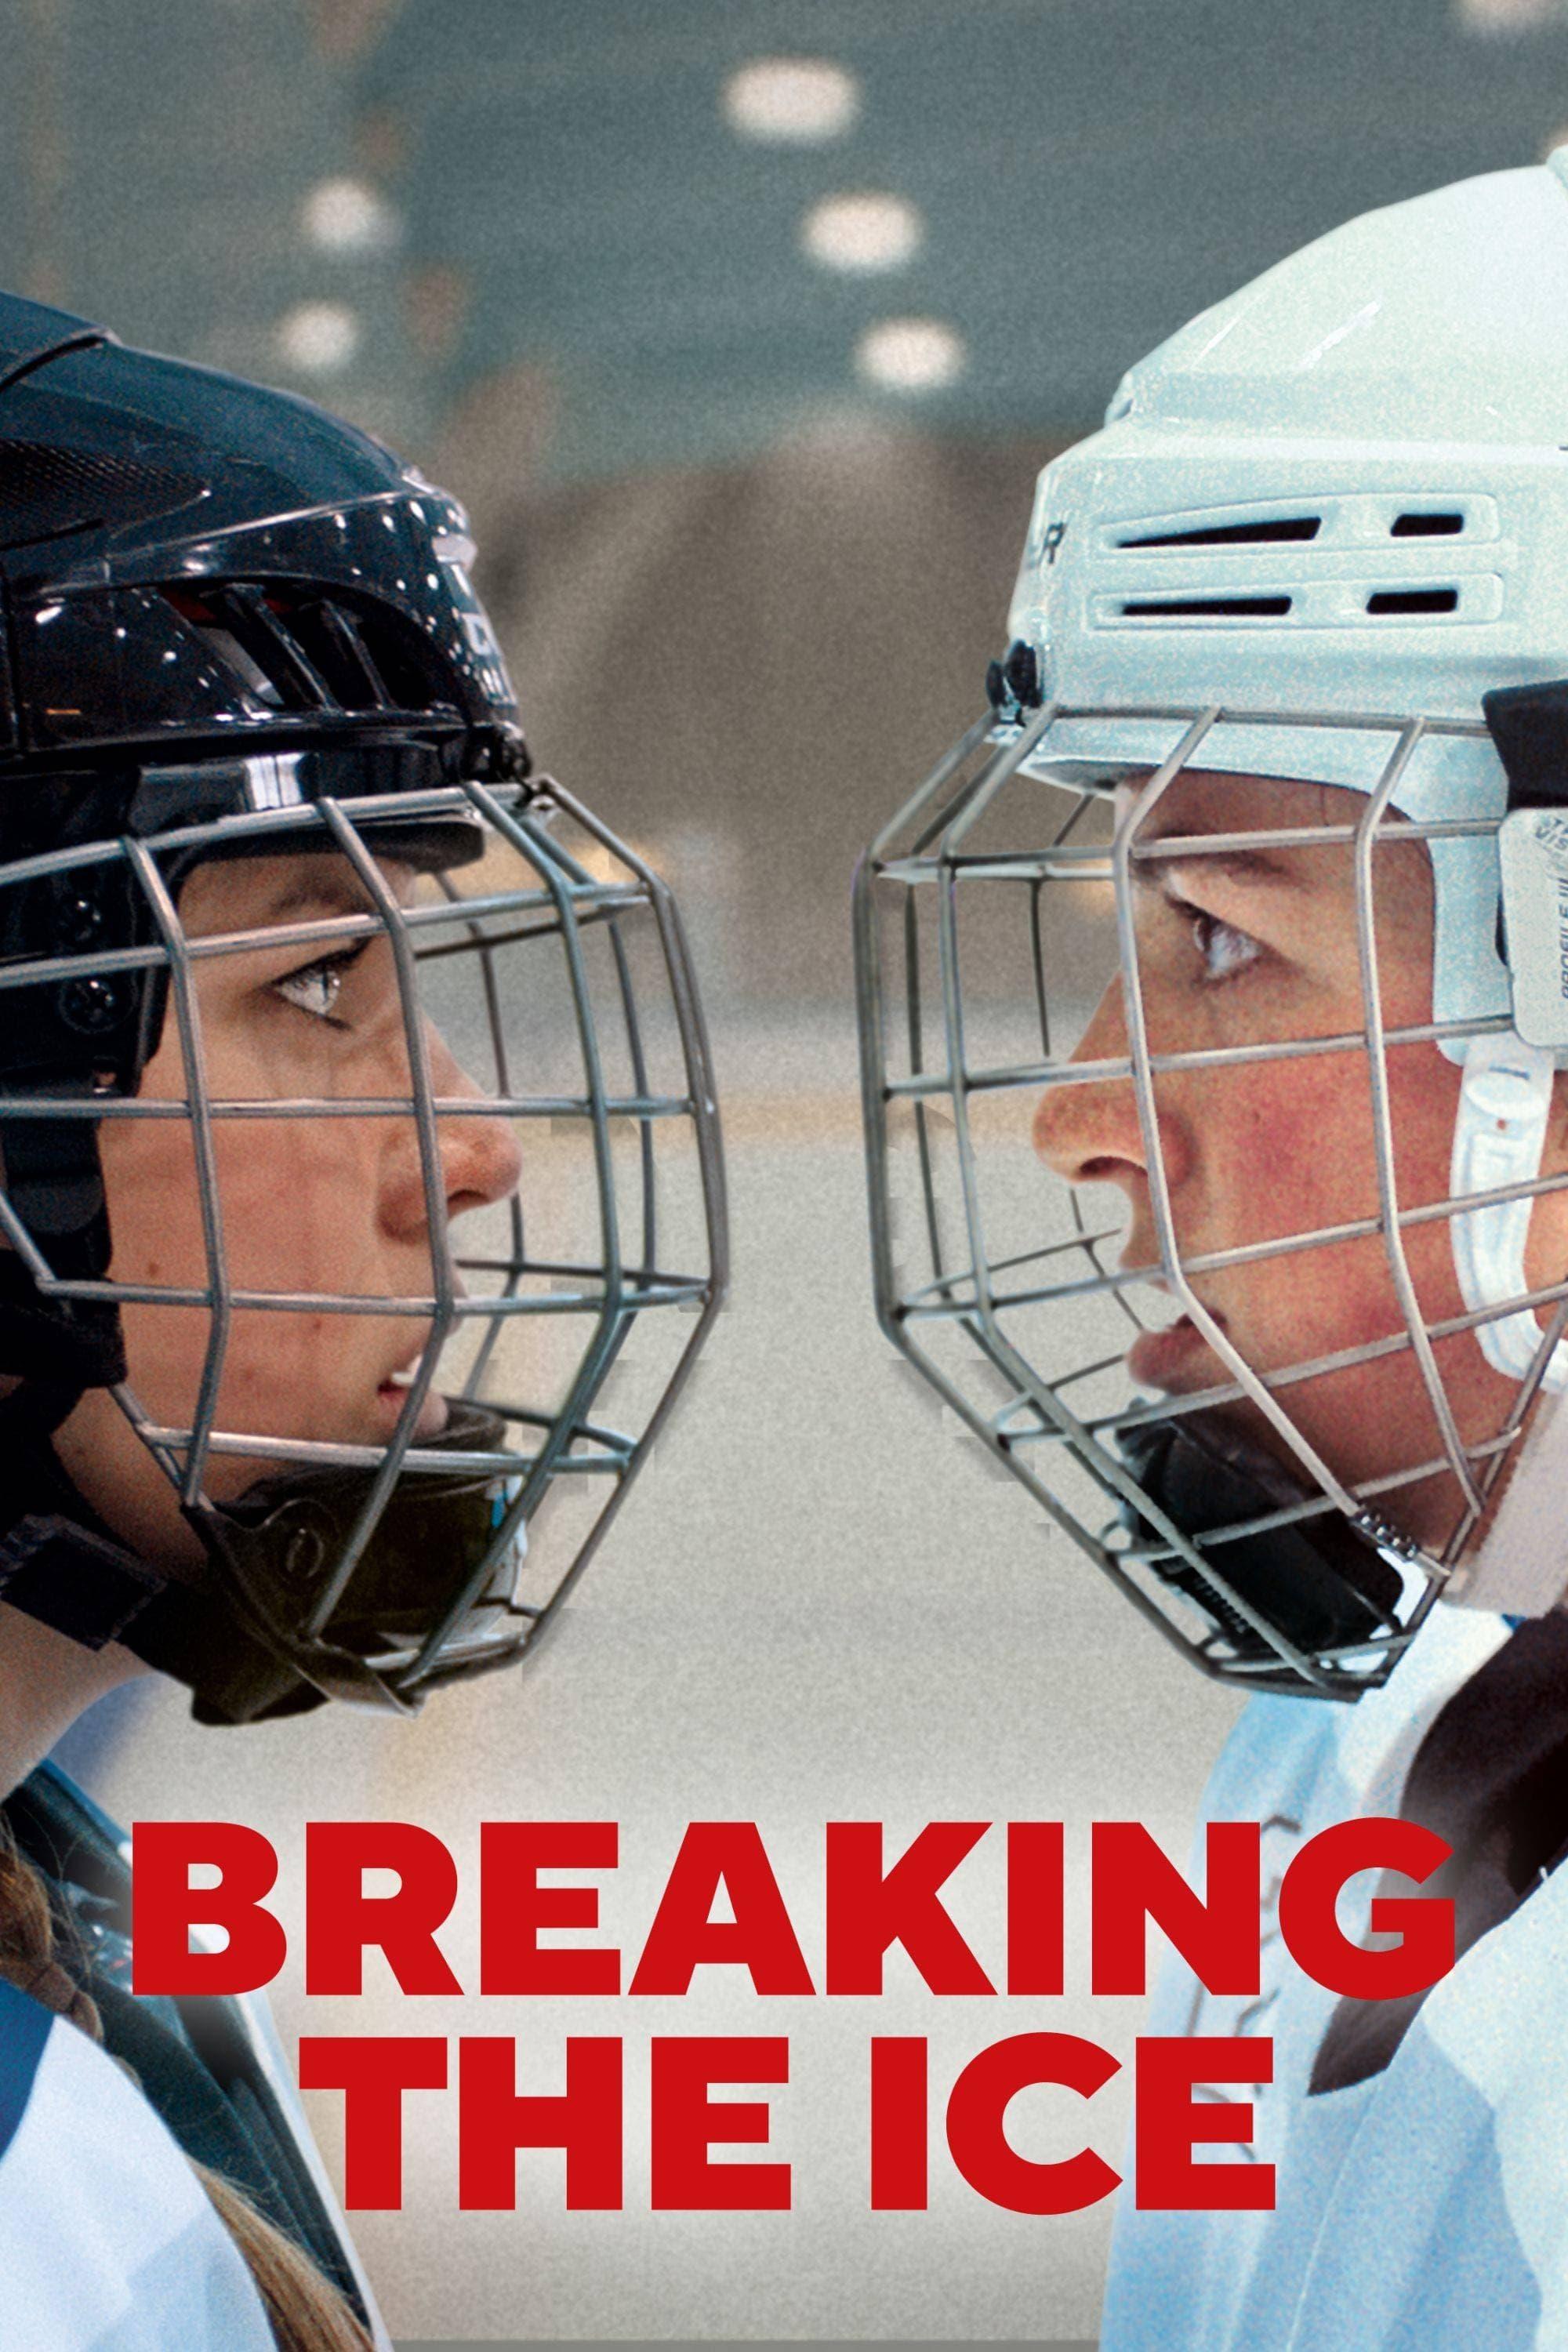 Breaking the Ice poster